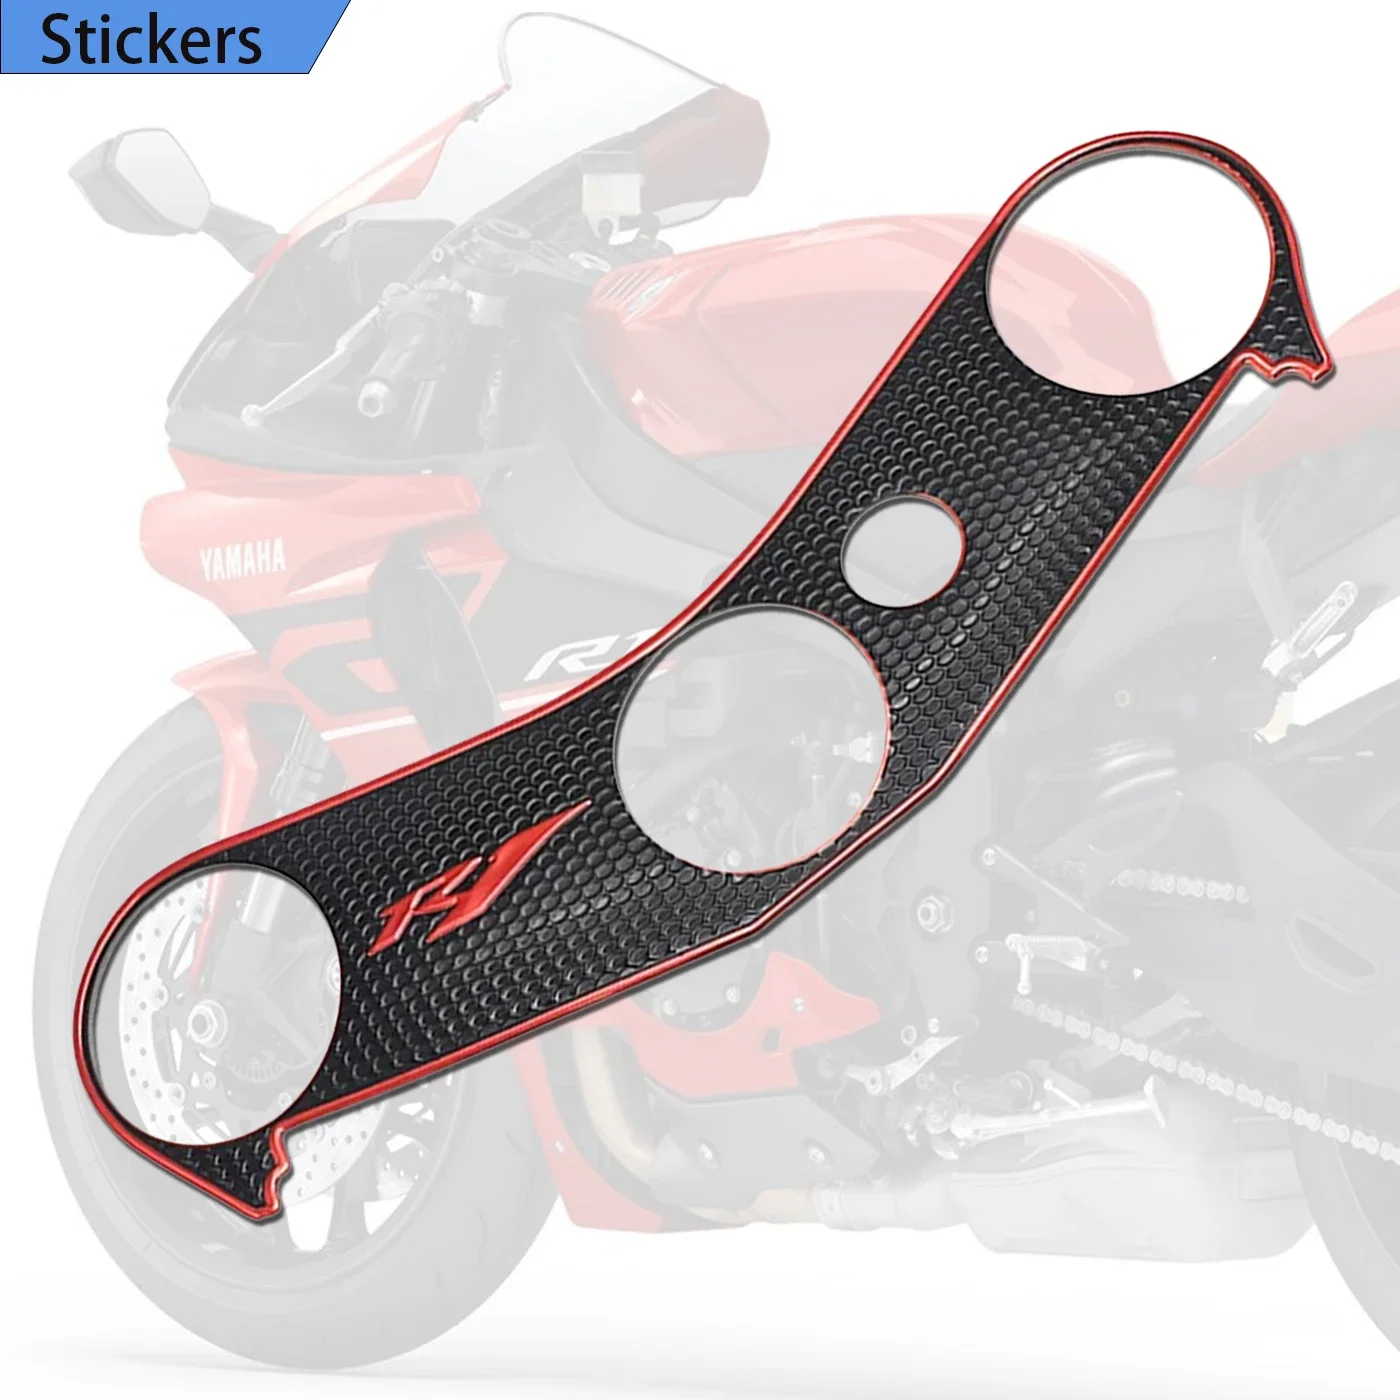 Motorcycle decals stickers Top Clamp Yoke Triple Tree Case Pad Decal 2005 2006 2007 2008 Fit YAMAHA YZF R1 YZF-R1 YZFR1